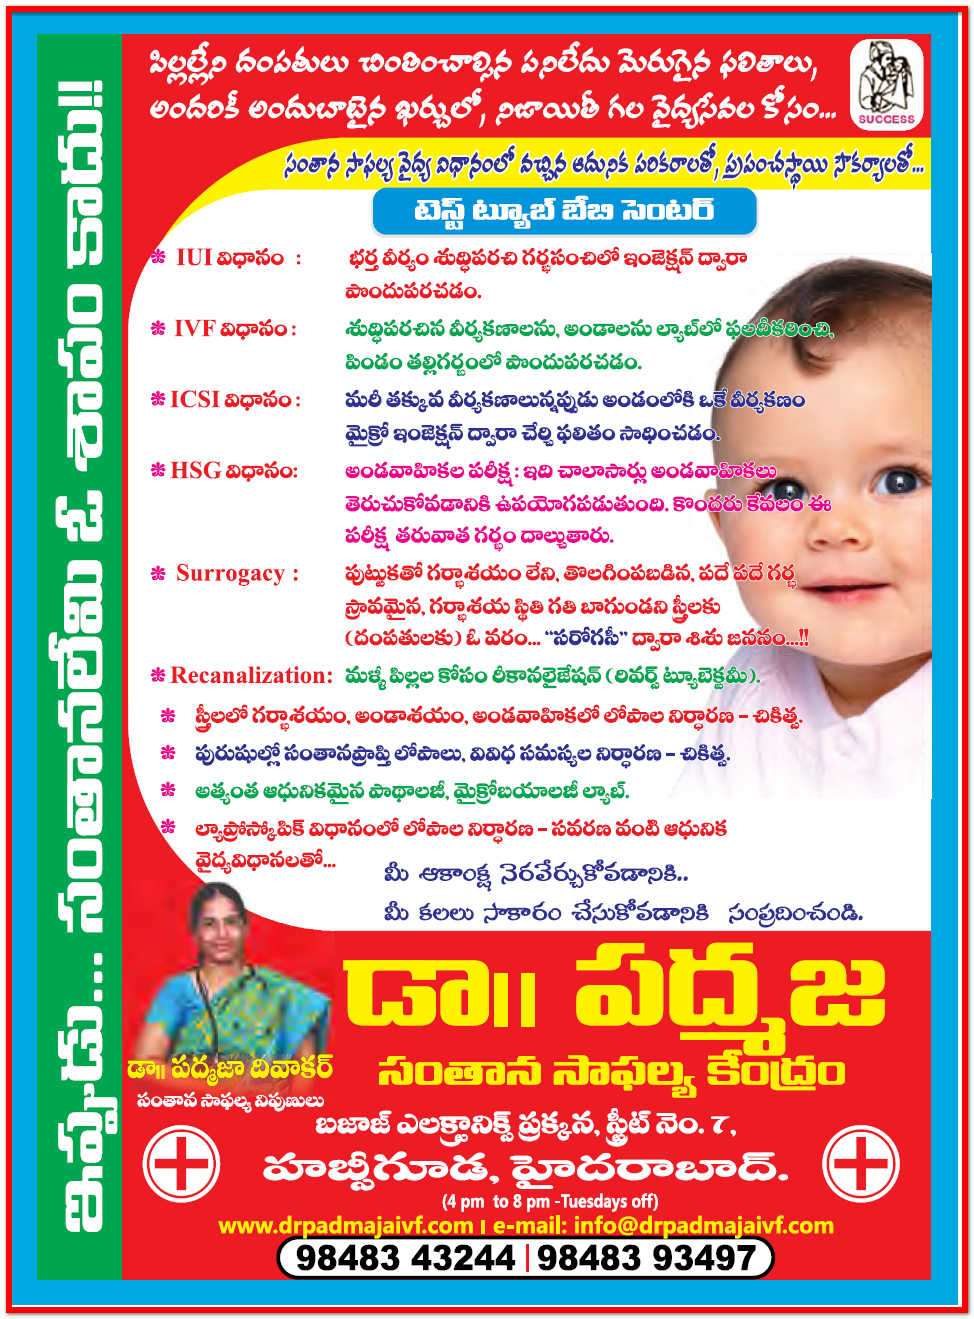 TELUGU WEB WORLD: AN ARTICLE ABOUT TEST TUBE BABY - WHAT IS IUI - WHAT IS  IVF - WHAT IS ICSI - WHAT IS HSG - ABOUT SURROGACY - AND FINALLY  RECANALISATION -